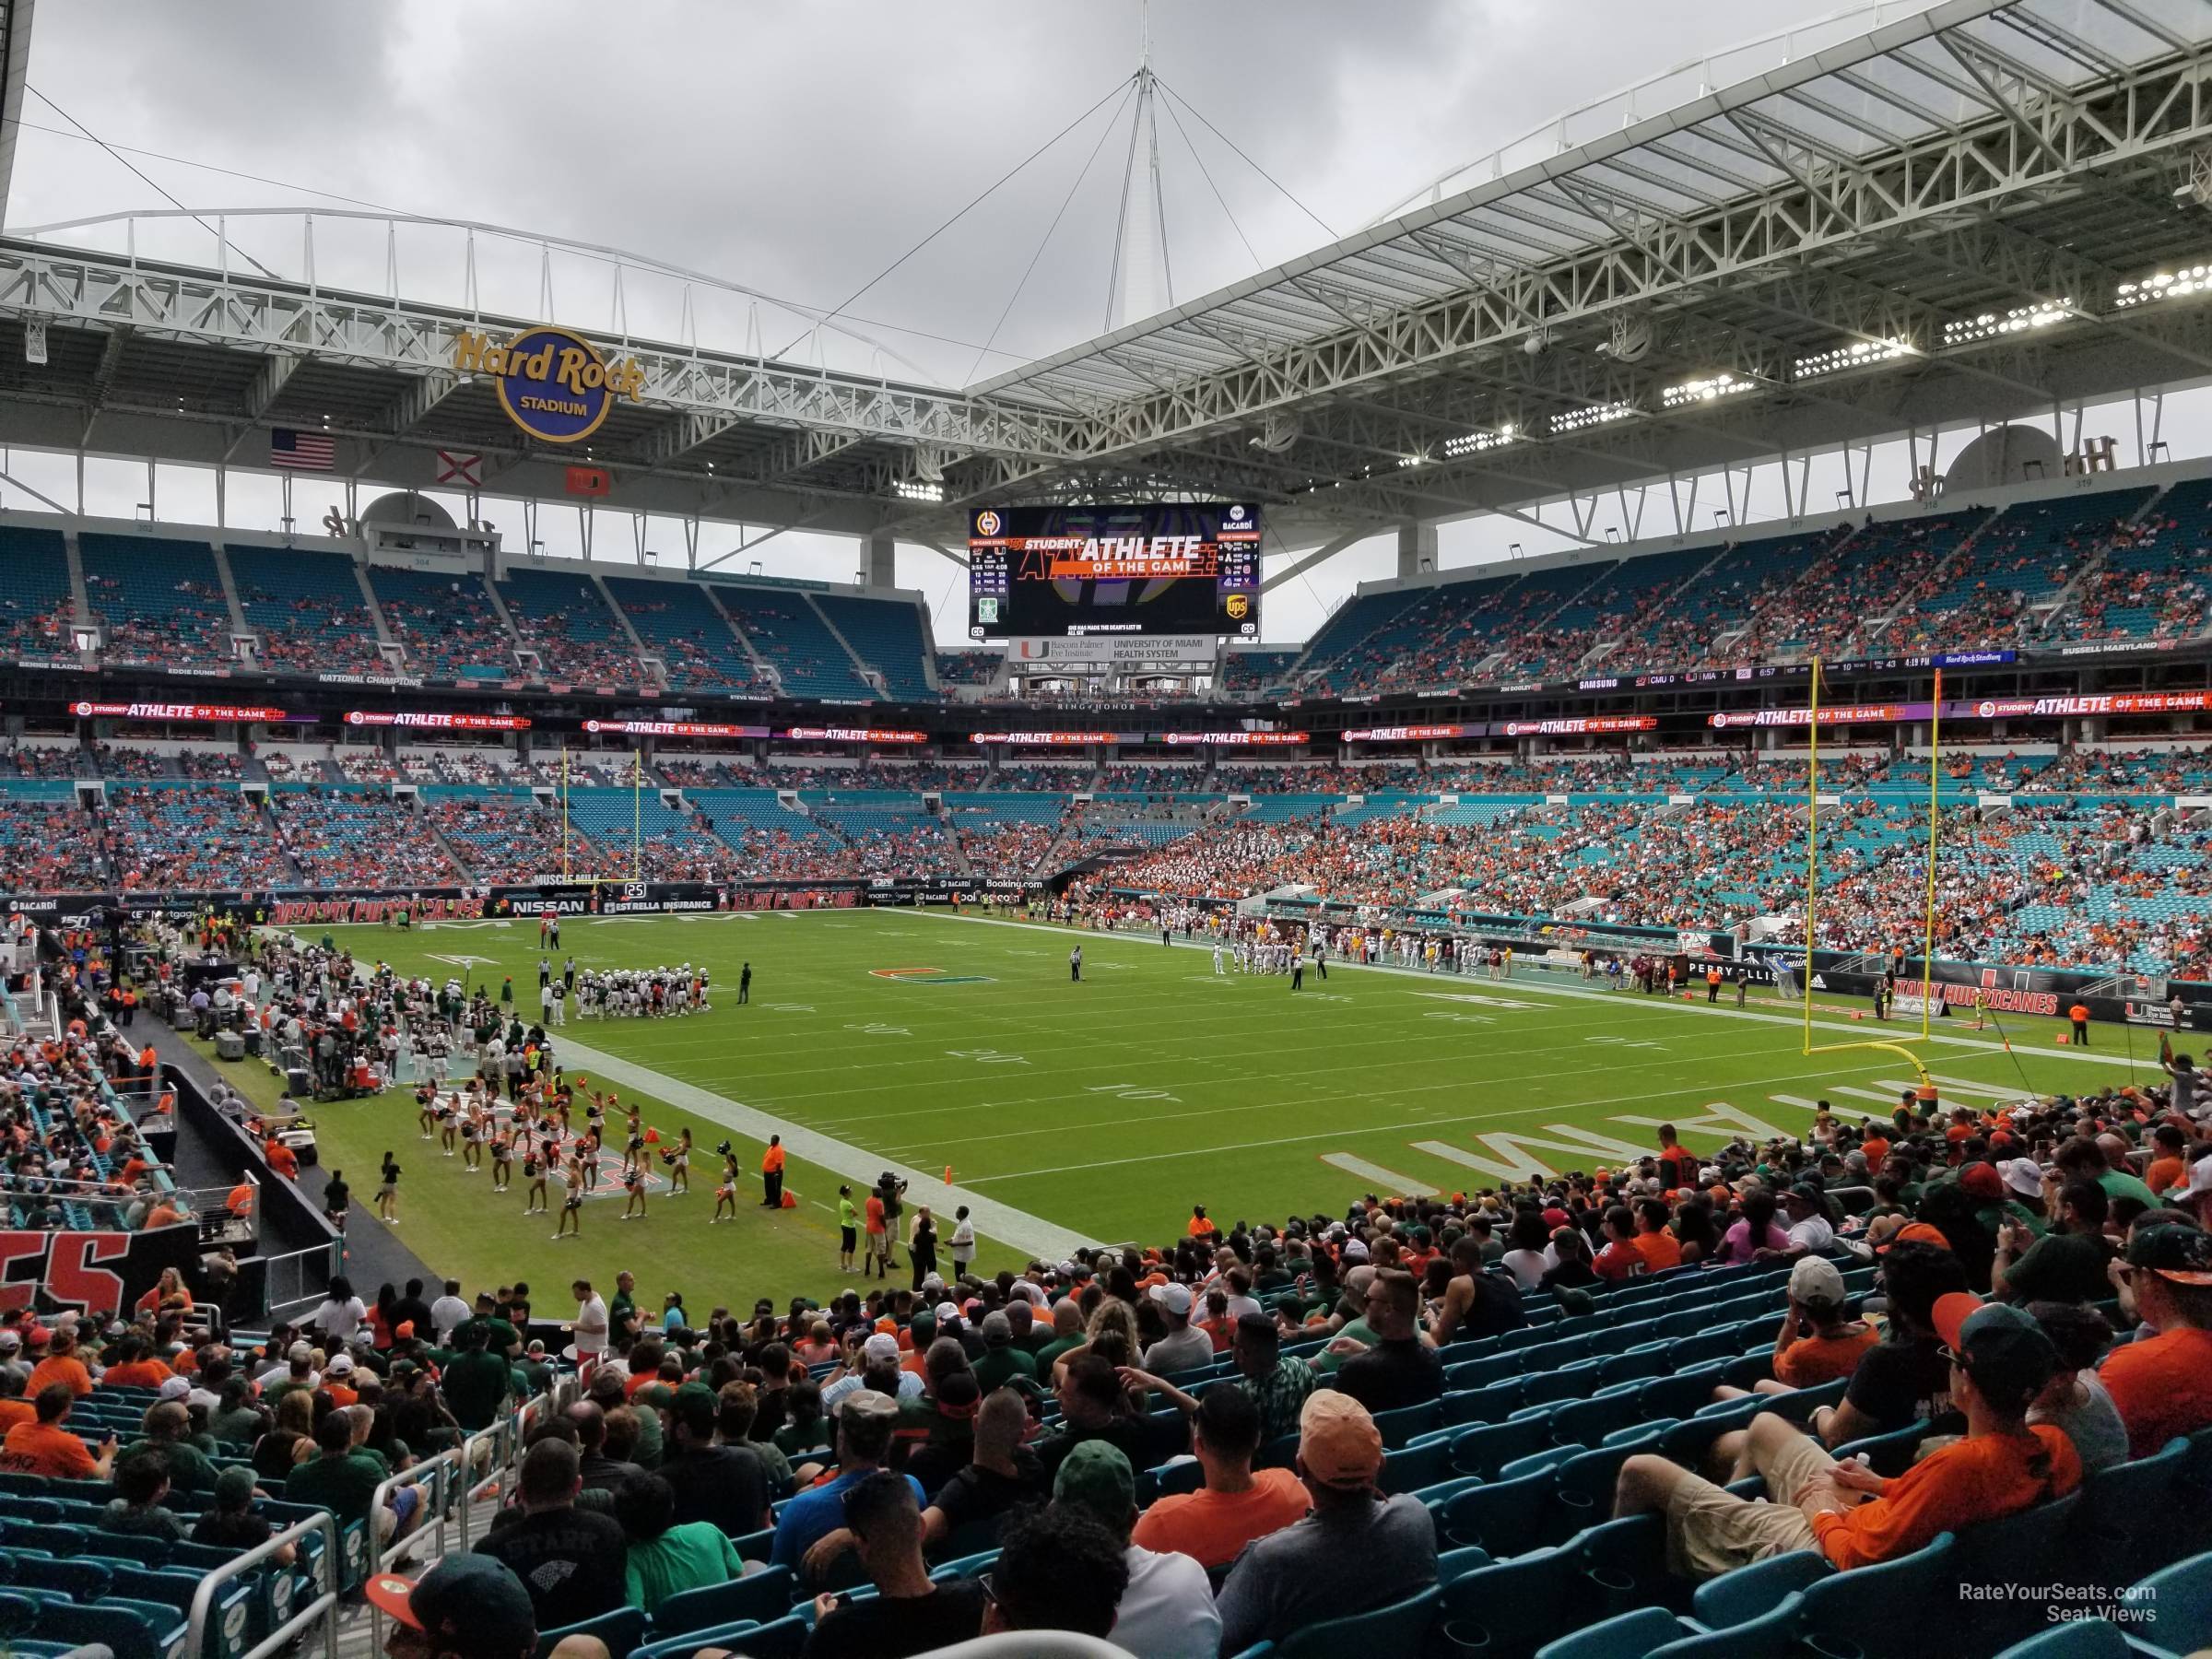 section 135, row 28 seat view  for football - hard rock stadium